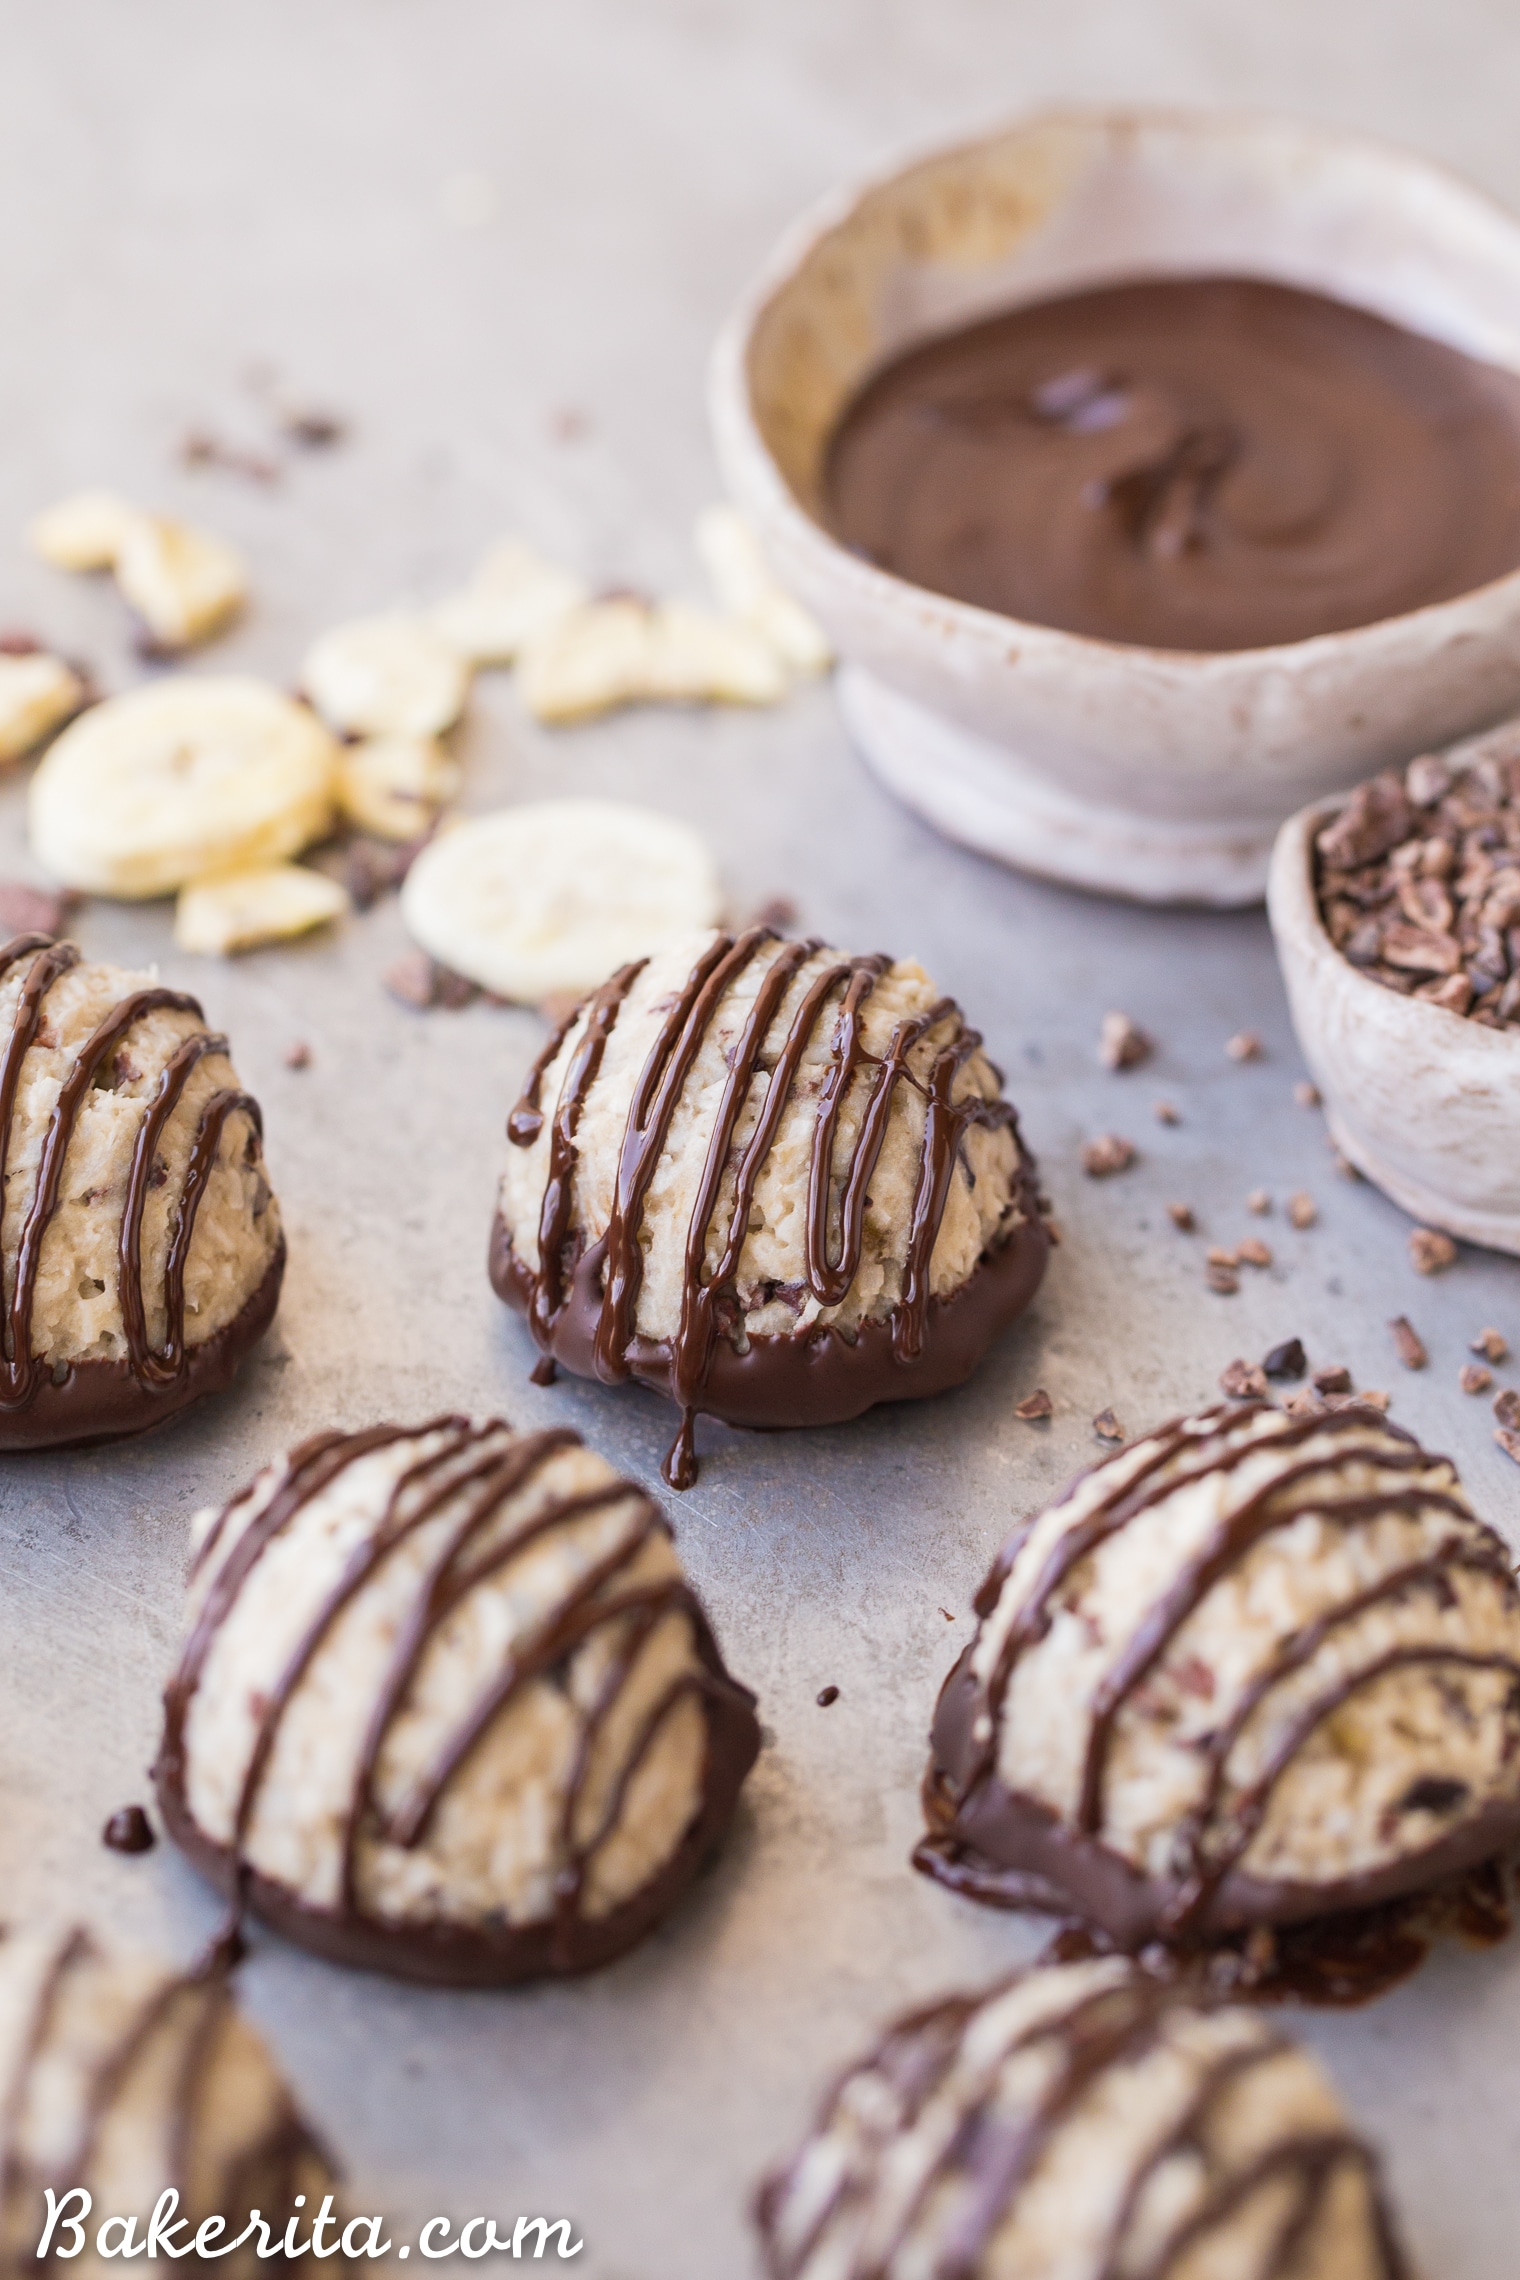 These No-Bake Chocolate Dipped Banana Macaroons are a quick and easy treat bursting with banana flavor! These gluten-free, paleo, vegan, and nut-free macaroons are hard to resist, especially once they're dipped and drizzled with dark chocolate.